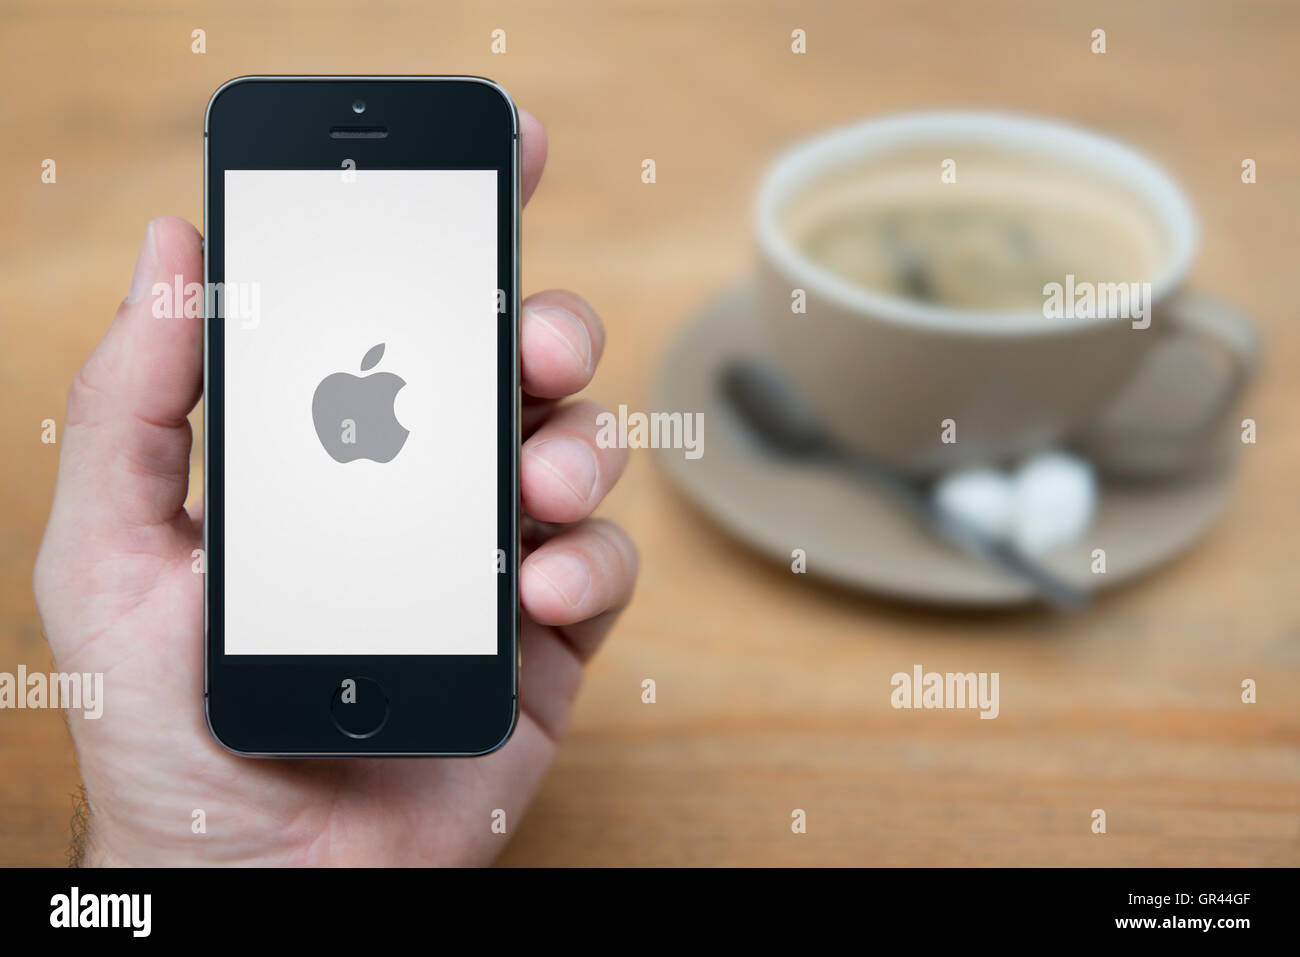 A man looks at his iPhone which displays the Apple logo on a white background, with a cup of coffee (Editorial use only). Stock Photo